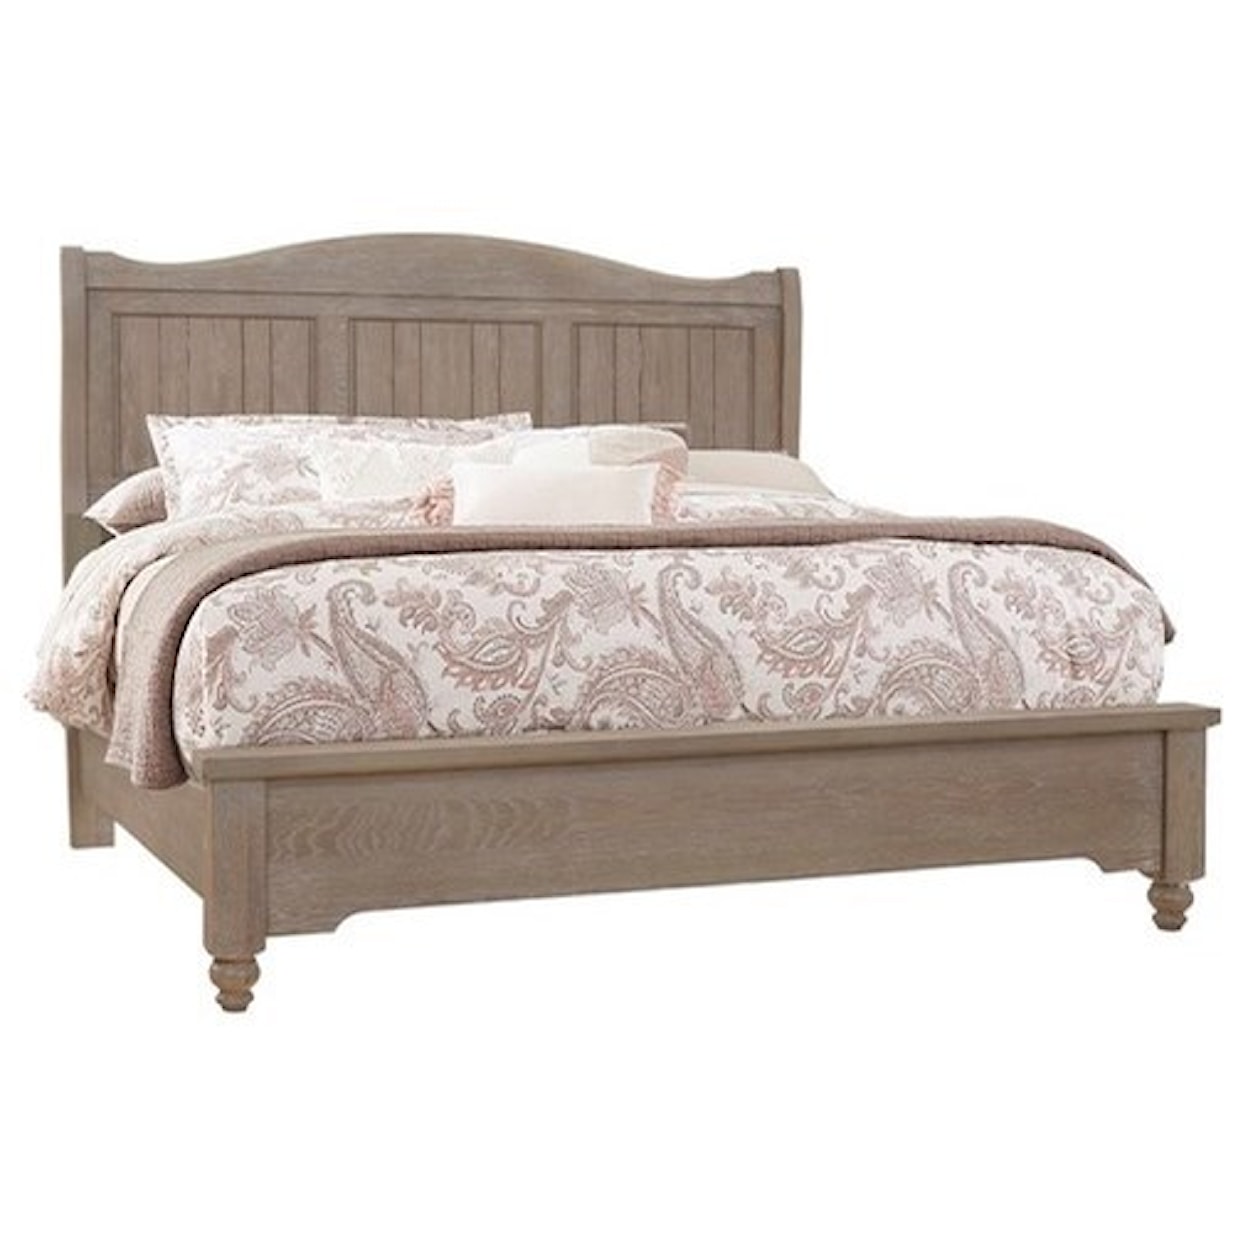 Virginia House Heritage King Low Profile Bed